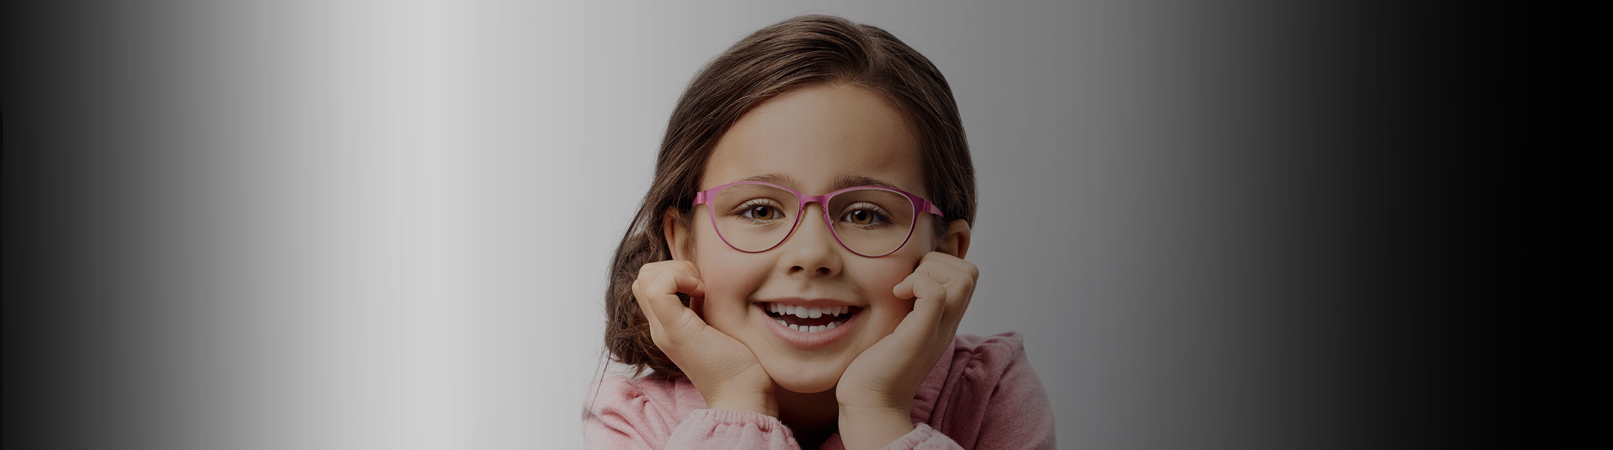 CHILDRENS-EYECARE - Perspective Opticians Solihull